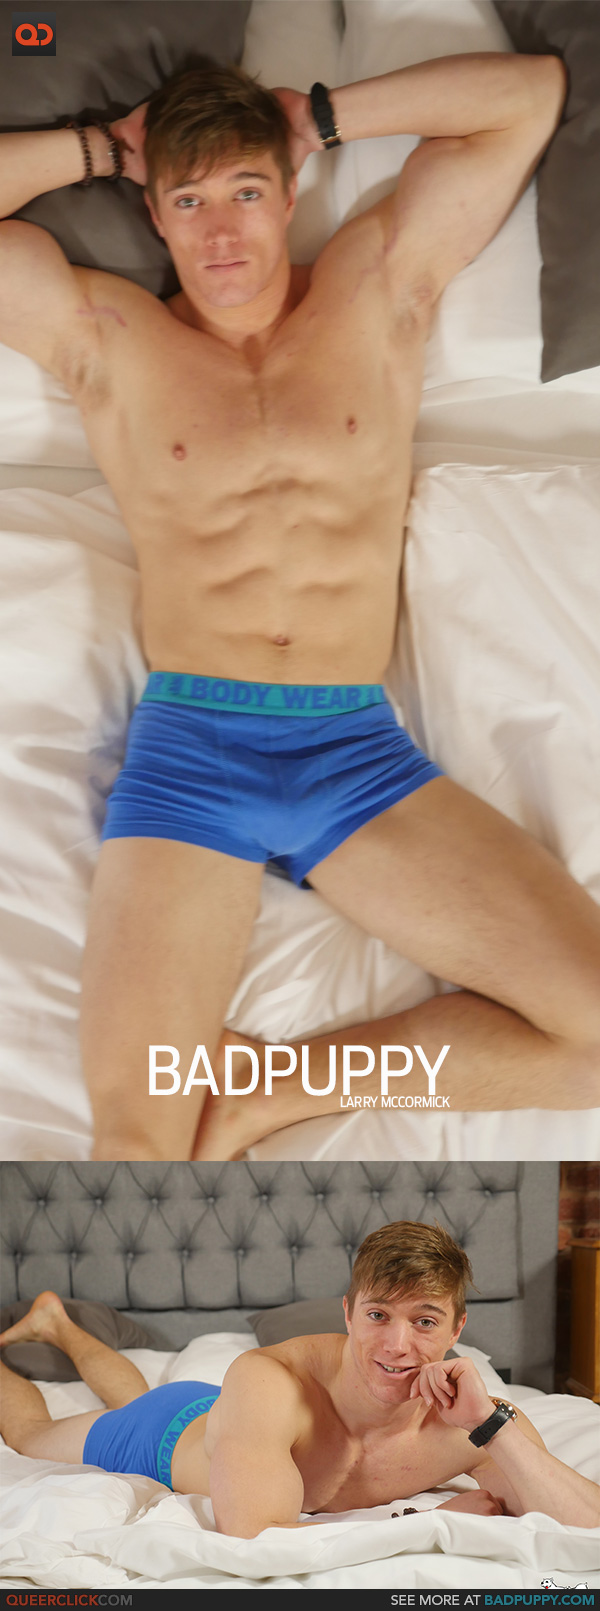 BadPuppy Larry McCormick picture